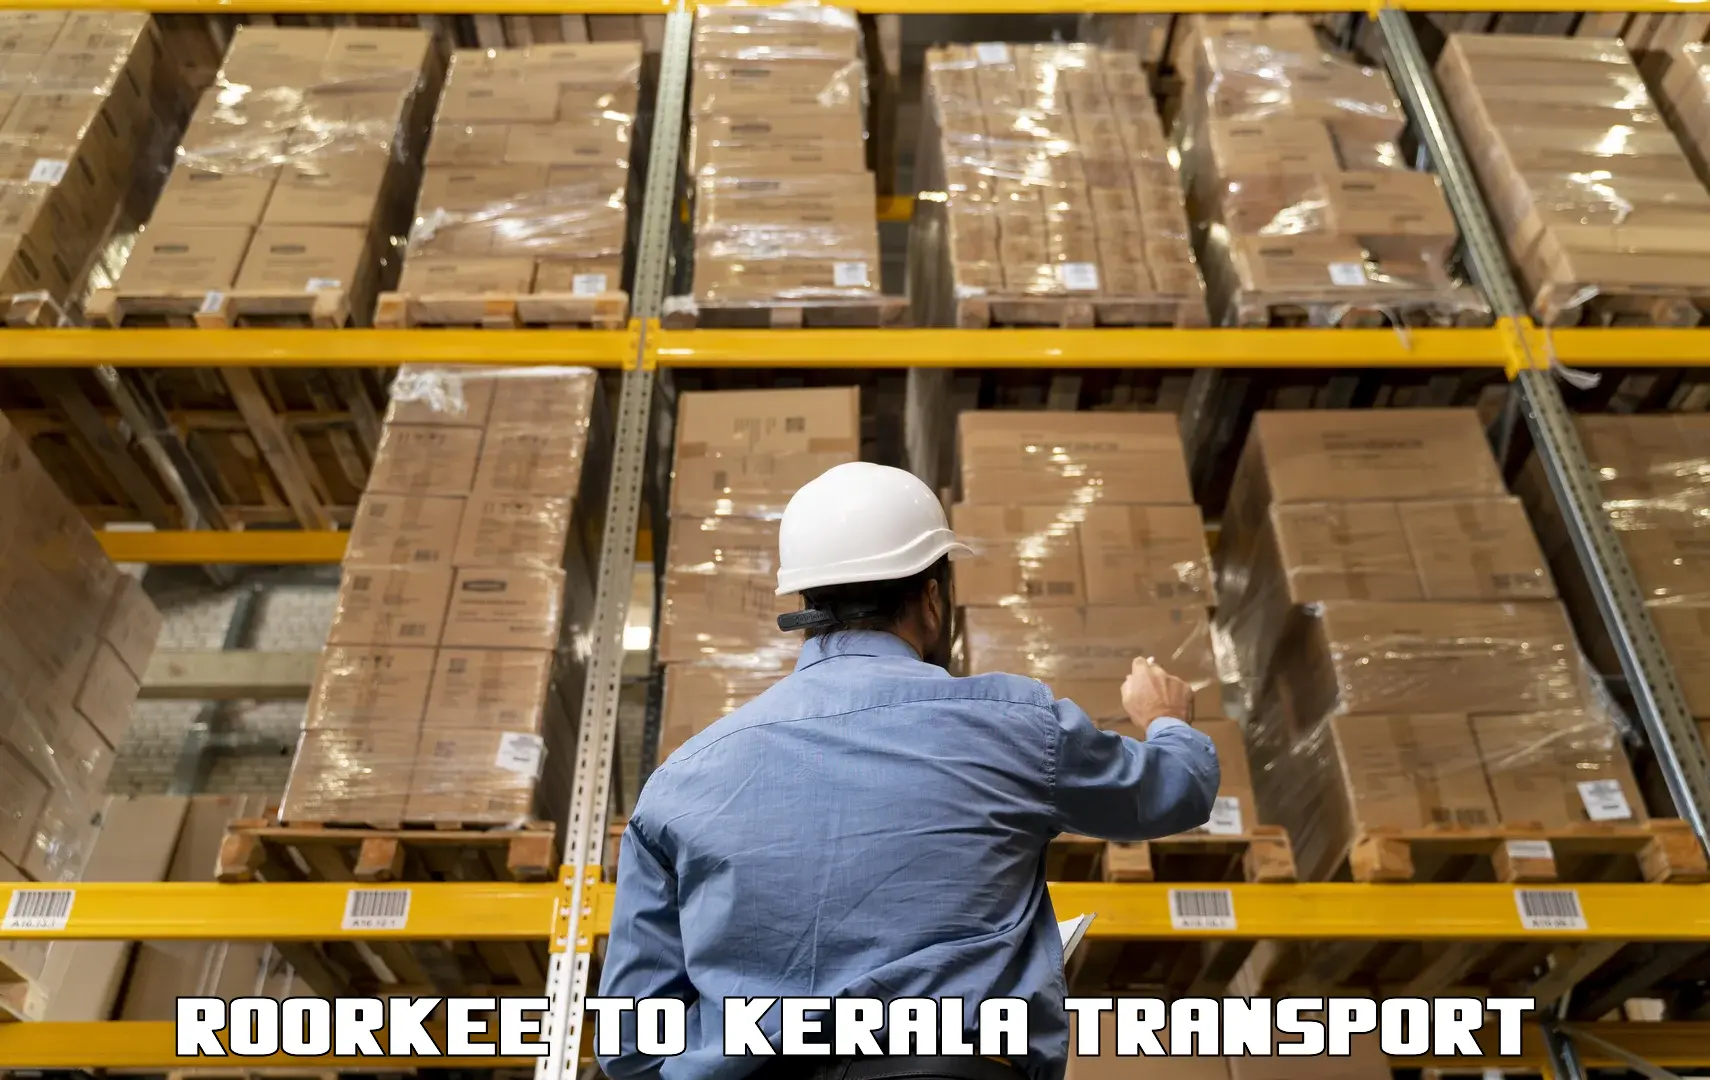 Delivery service Roorkee to Cochin Port Kochi